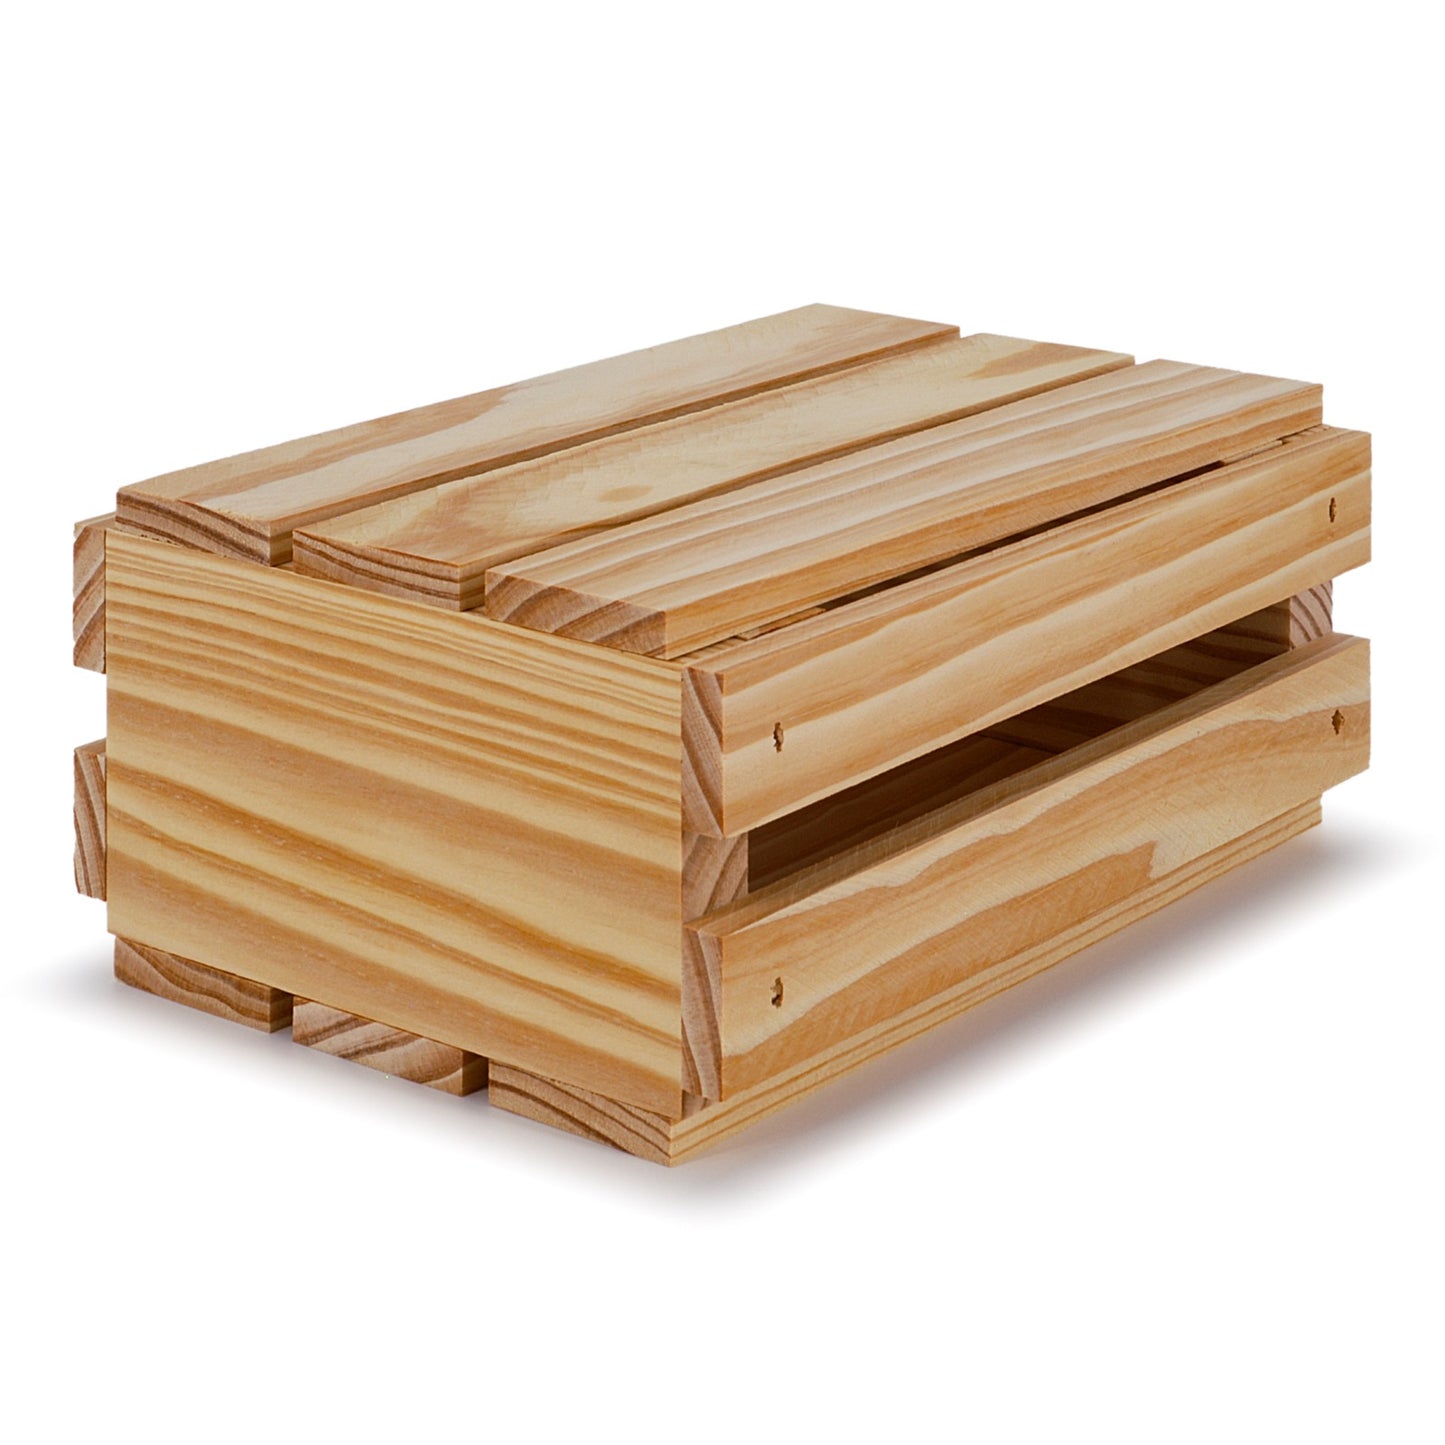 Small wooden crates with lid 8x6x3.5, 6-SS-8-6-3.5-NX-NW-LL, 12-SS-8-6-3.5-NX-NW-LL, 24-SS-8-6-3.5-NX-NW-LL, 48-SS-8-6-3.5-NX-NW-LL, 96-SS-8-6-3.5-NX-NW-LL